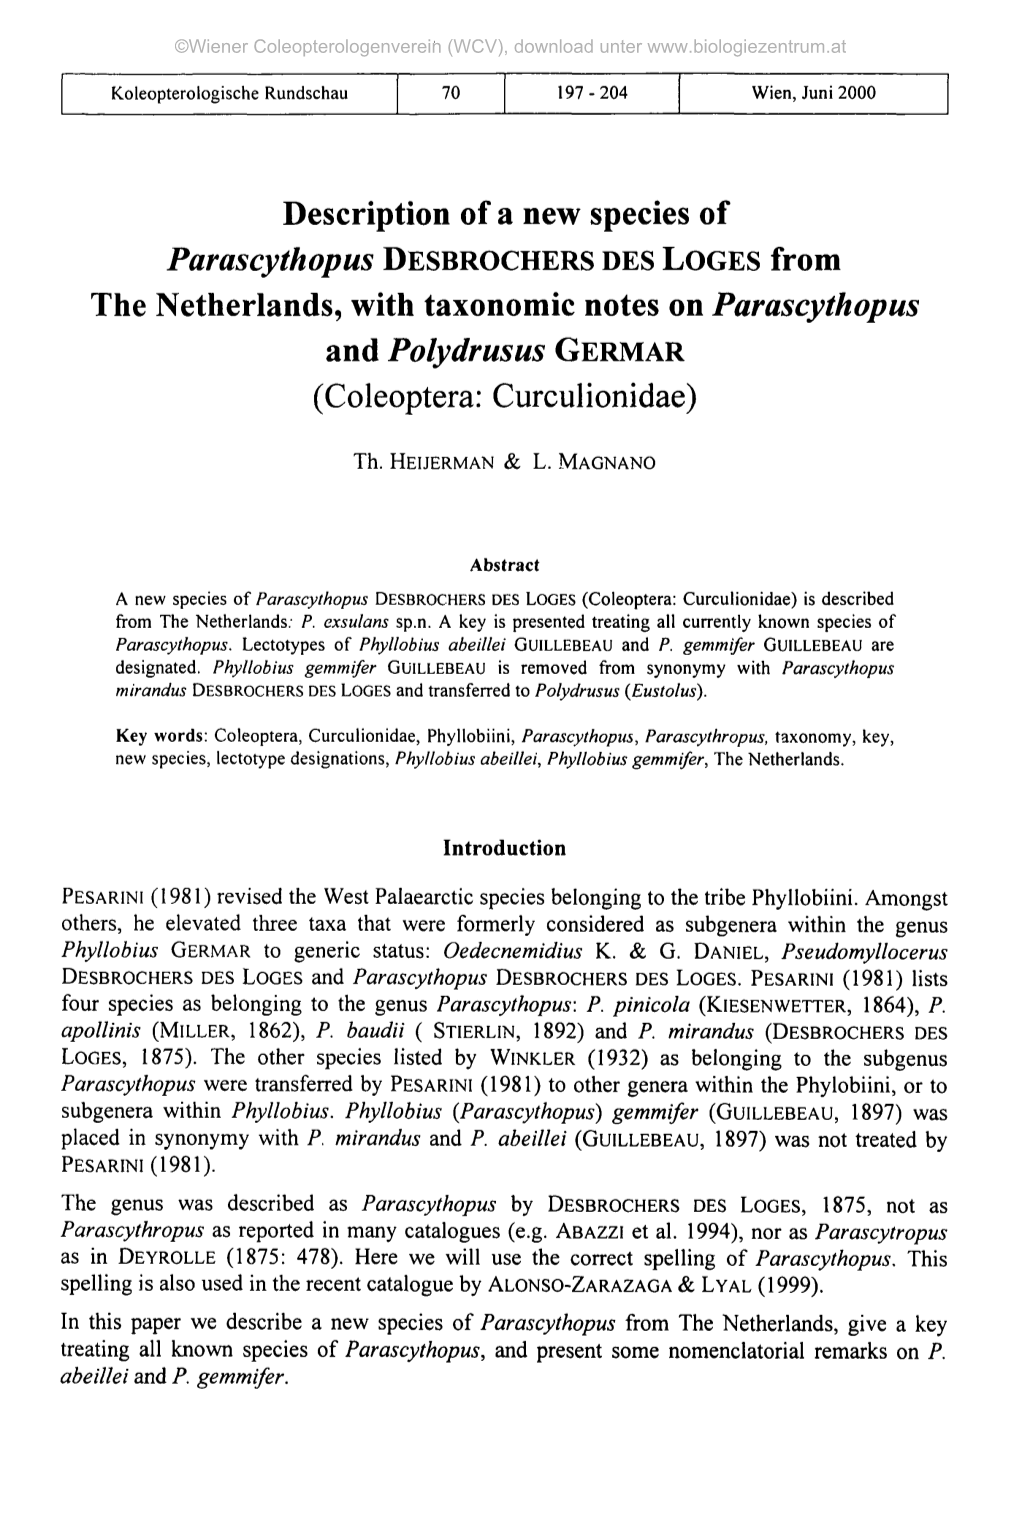 Description of a New Species of the Netherlands, with Taxonomic Notes on Parascythopus and Polydrusus GERMAR